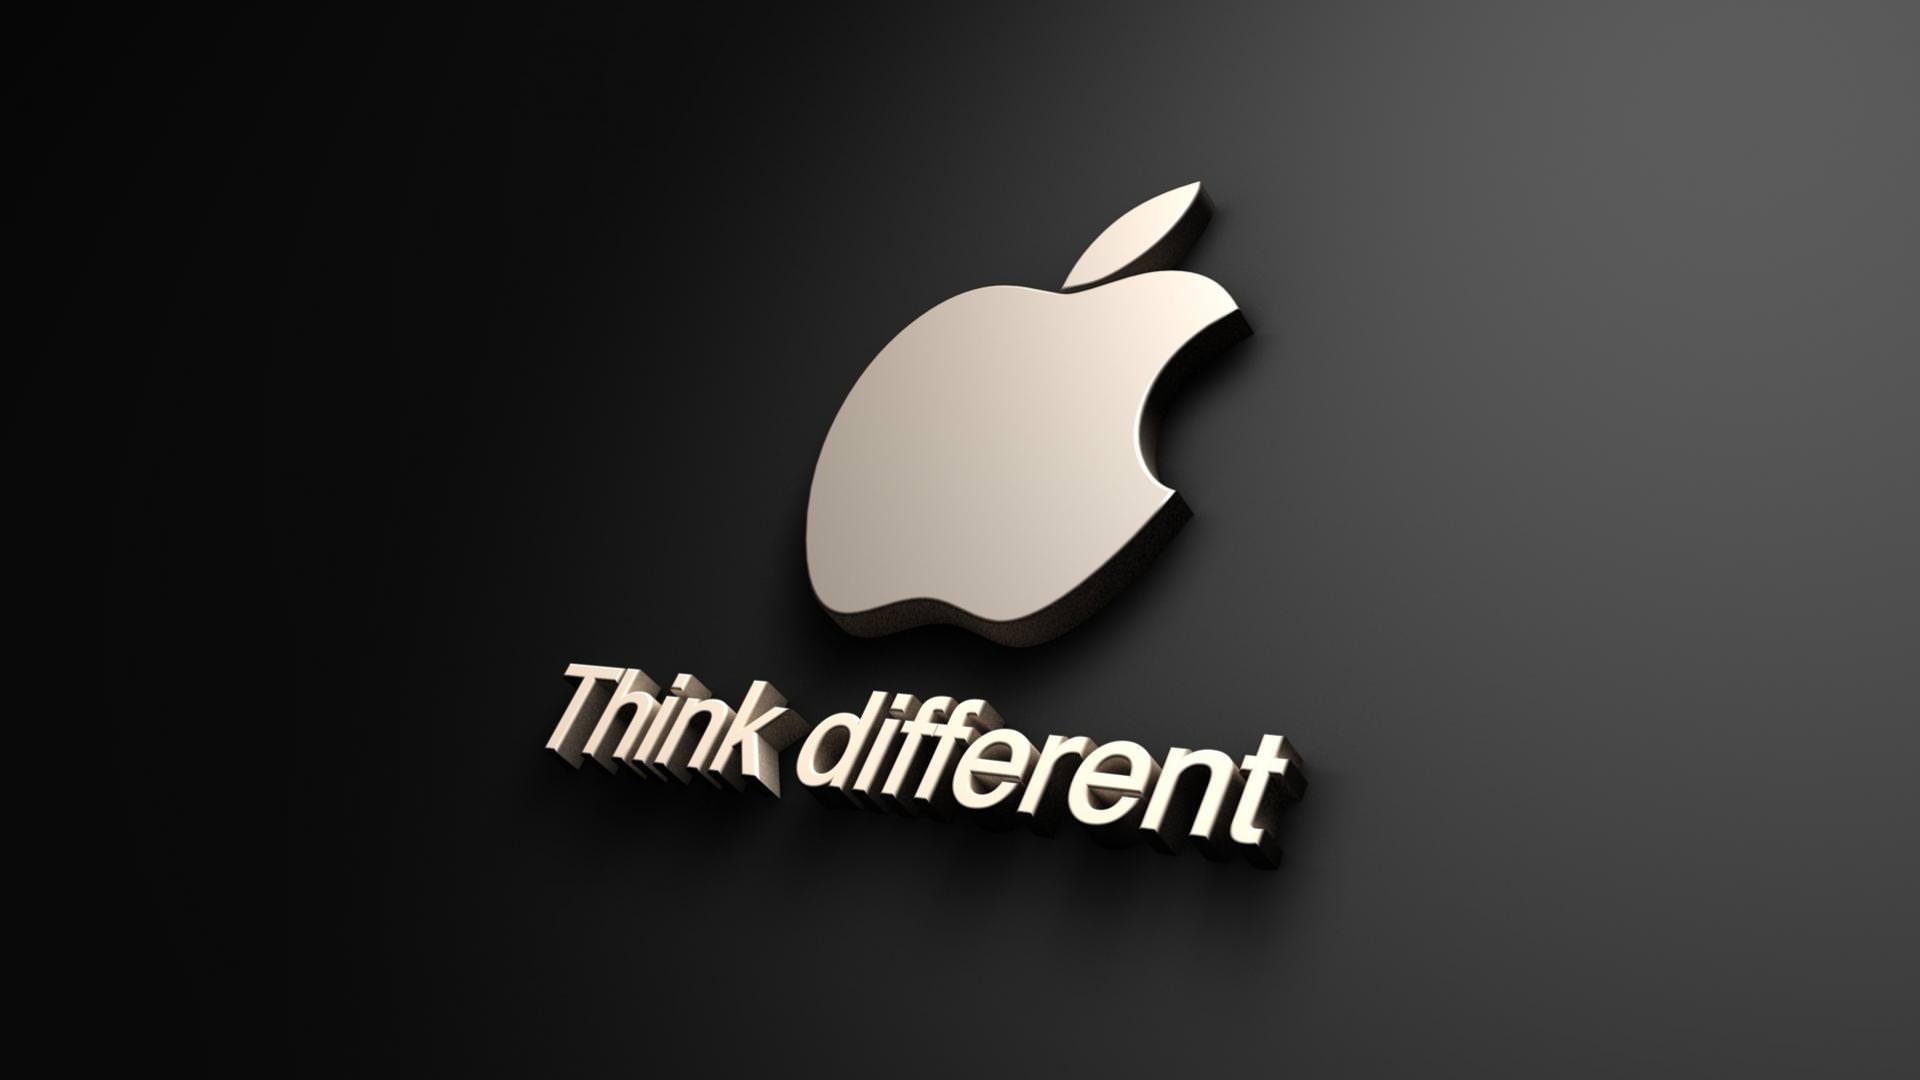 How Apple Got Its Name And Logo